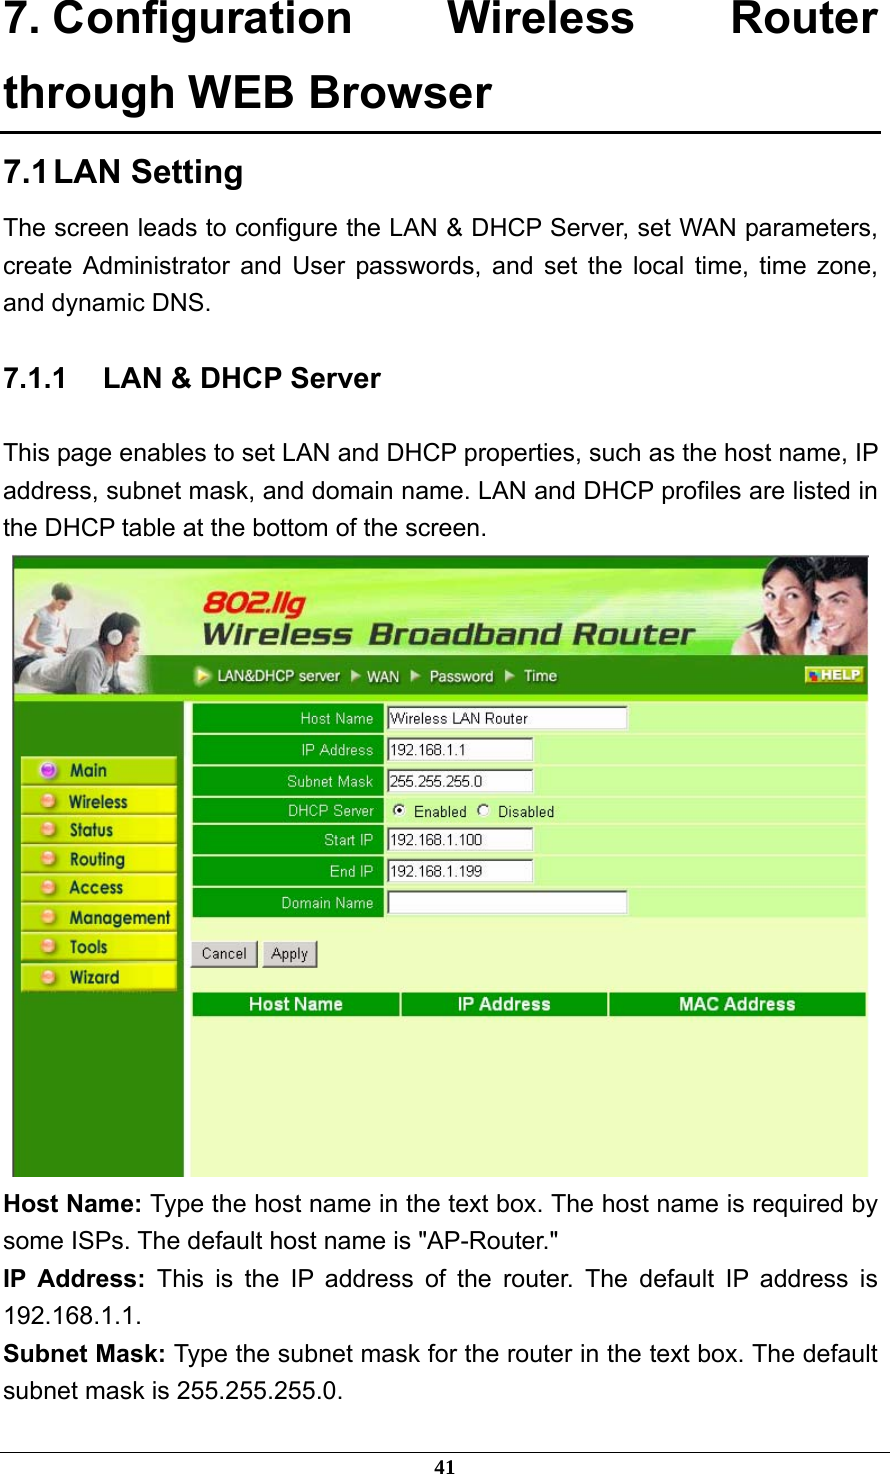 7. Configuration Wireless Router through WEB Browser 7.1 LAN  Setting The screen leads to configure the LAN &amp; DHCP Server, set WAN parameters, create Administrator and User passwords, and set the local time, time zone, and dynamic DNS. 7.1.1  LAN &amp; DHCP Server This page enables to set LAN and DHCP properties, such as the host name, IP address, subnet mask, and domain name. LAN and DHCP profiles are listed in the DHCP table at the bottom of the screen.  Host Name: Type the host name in the text box. The host name is required by some ISPs. The default host name is &quot;AP-Router.&quot; IP Address: This is the IP address of the router. The default IP address is 192.168.1.1. Subnet Mask: Type the subnet mask for the router in the text box. The default subnet mask is 255.255.255.0. 41 